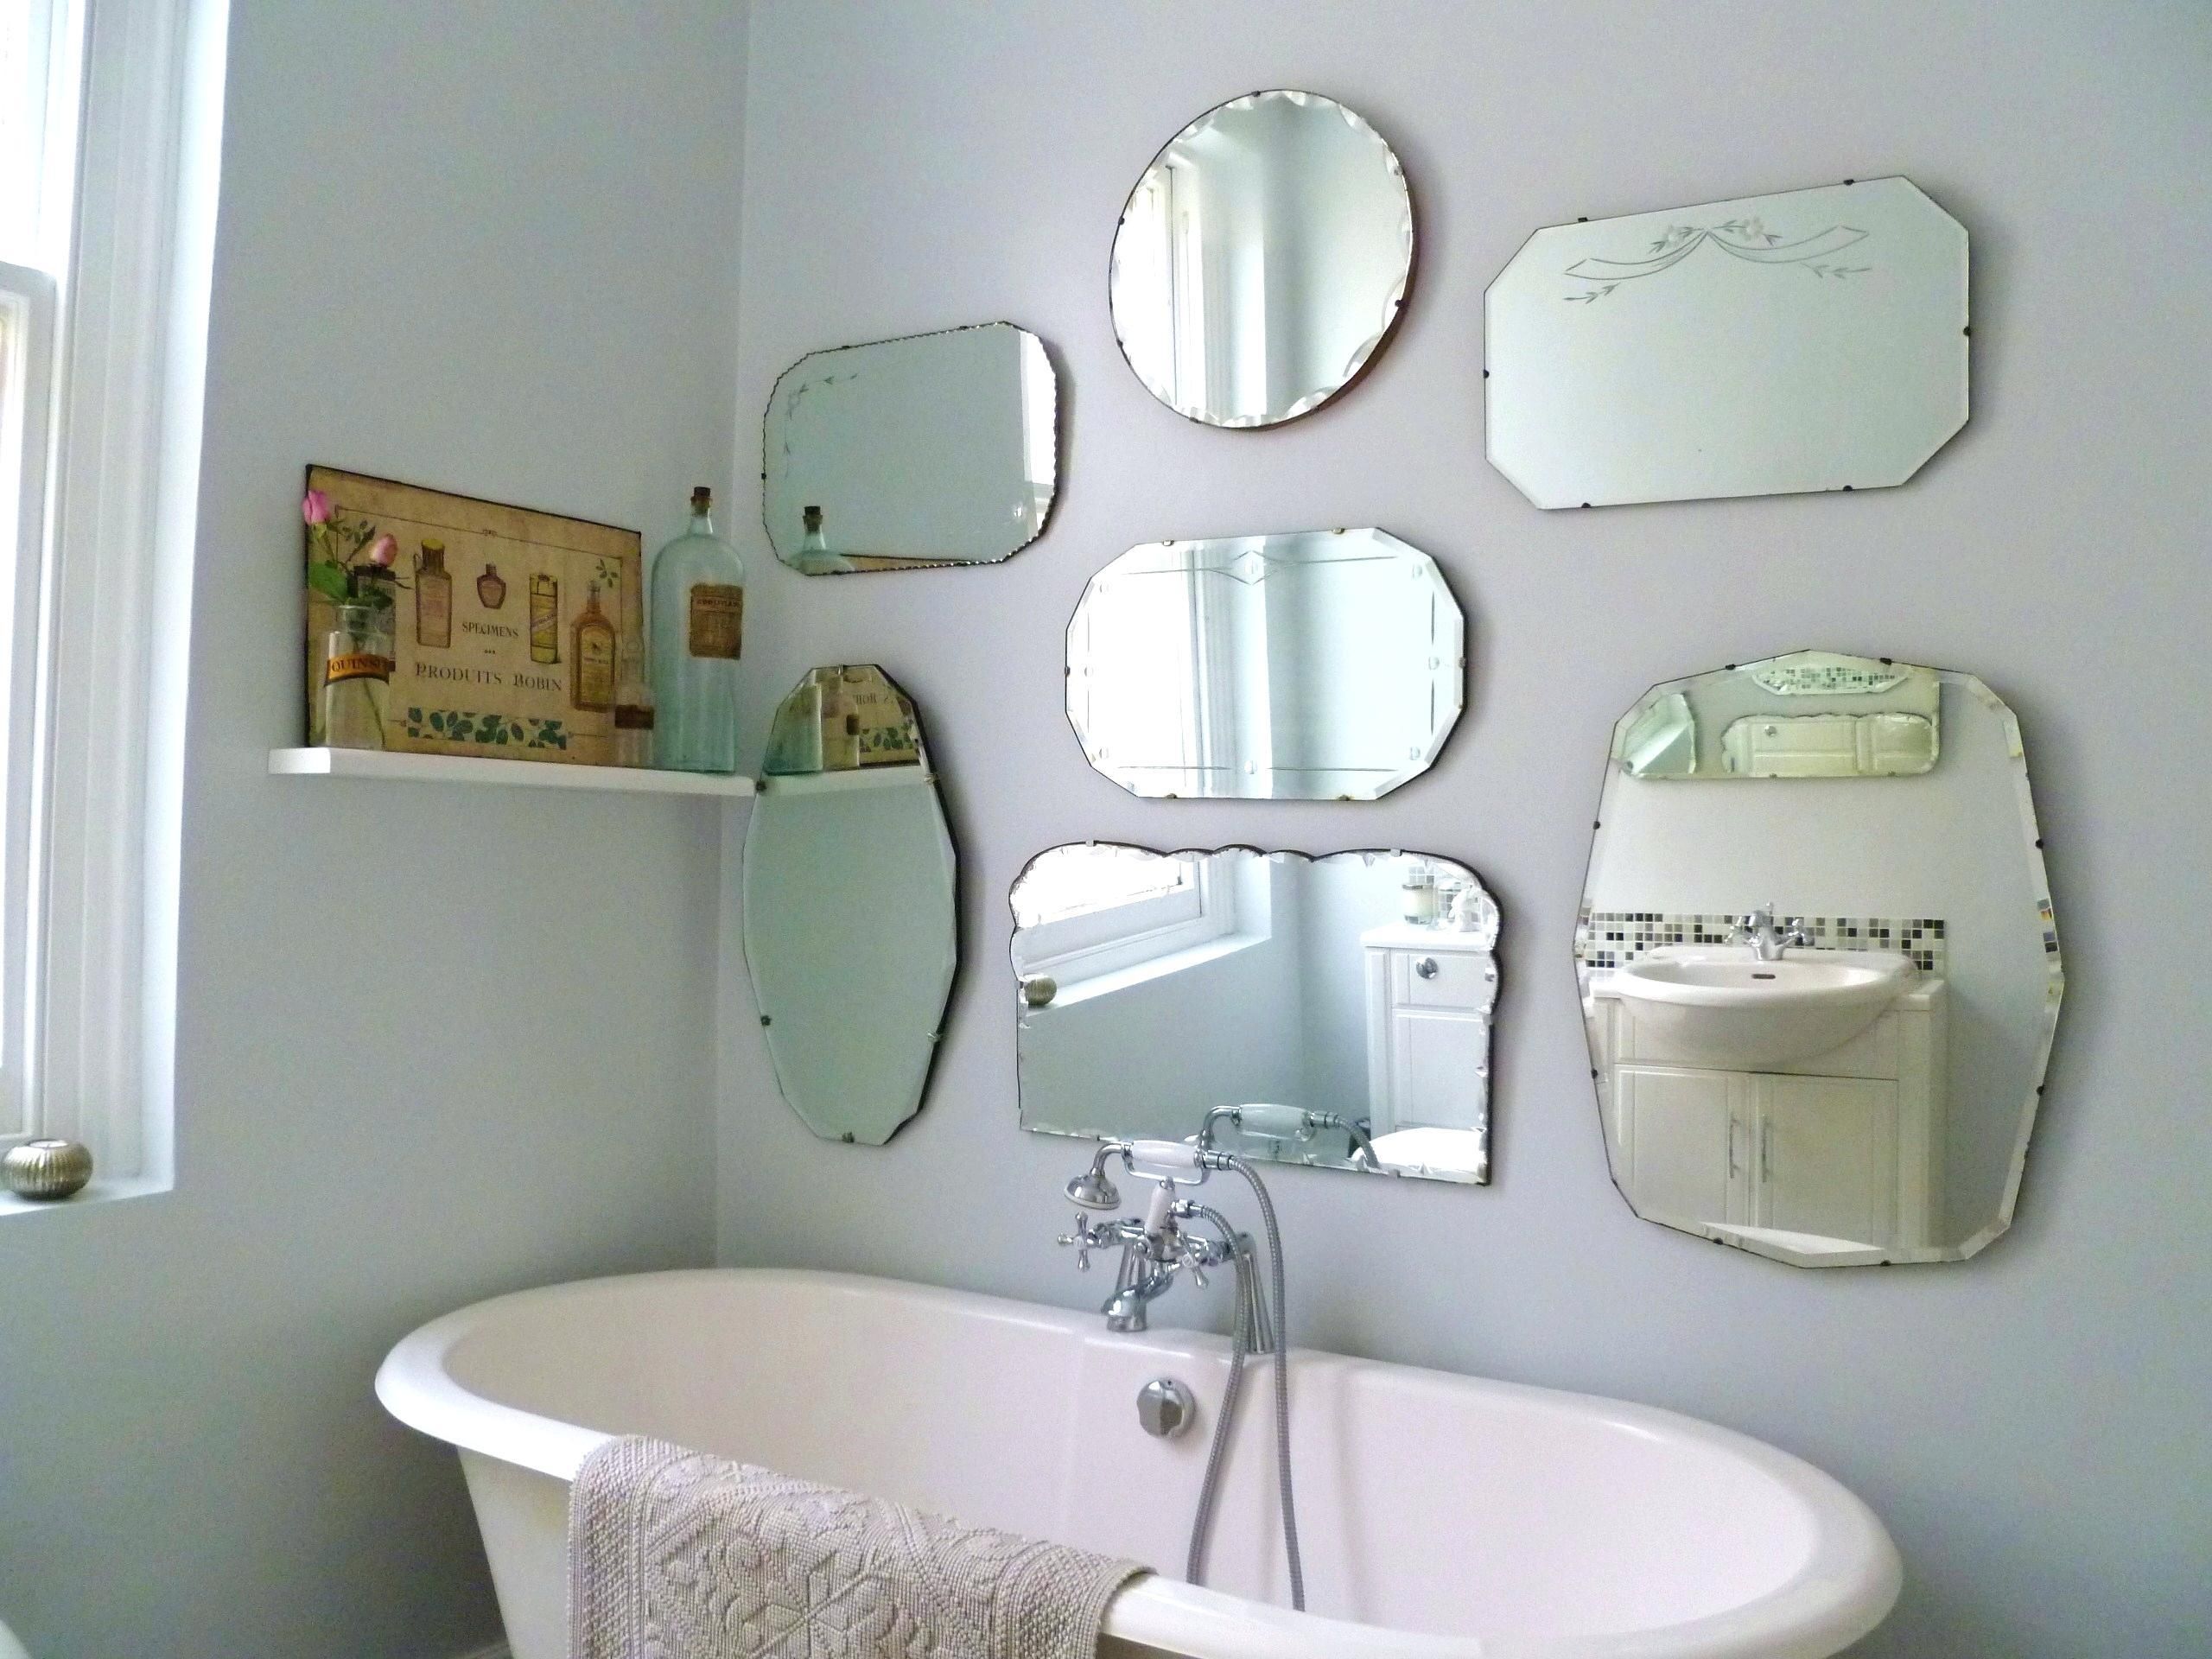 How To Hang A Display Of Vintage Mirrorswall Mirror Ideas Bathroom Inside Vintage Wall Mirrors (View 8 of 20)